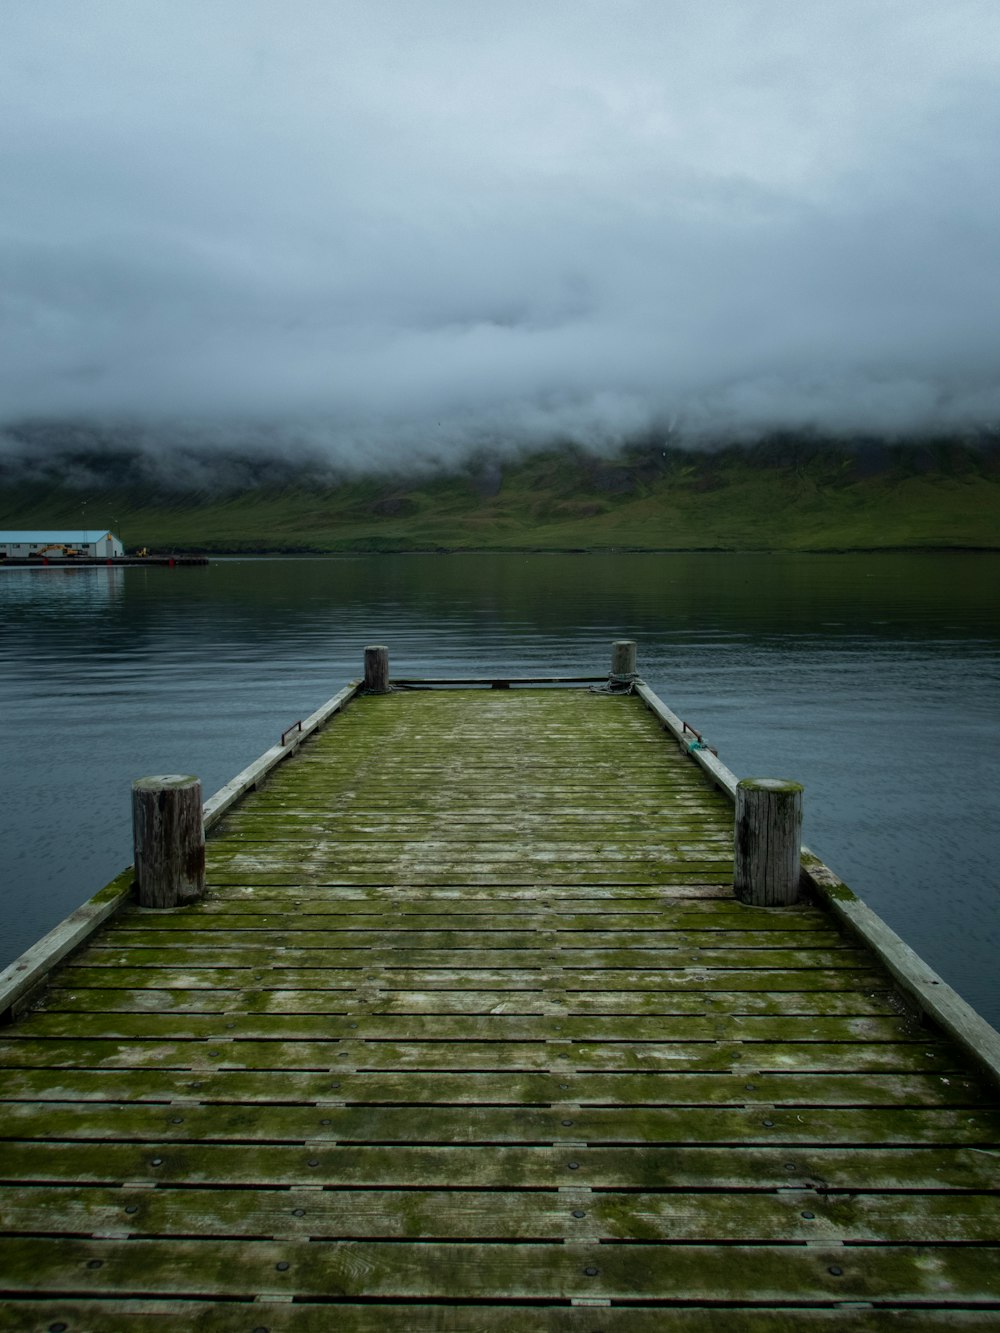 a wooden dock on a body of water